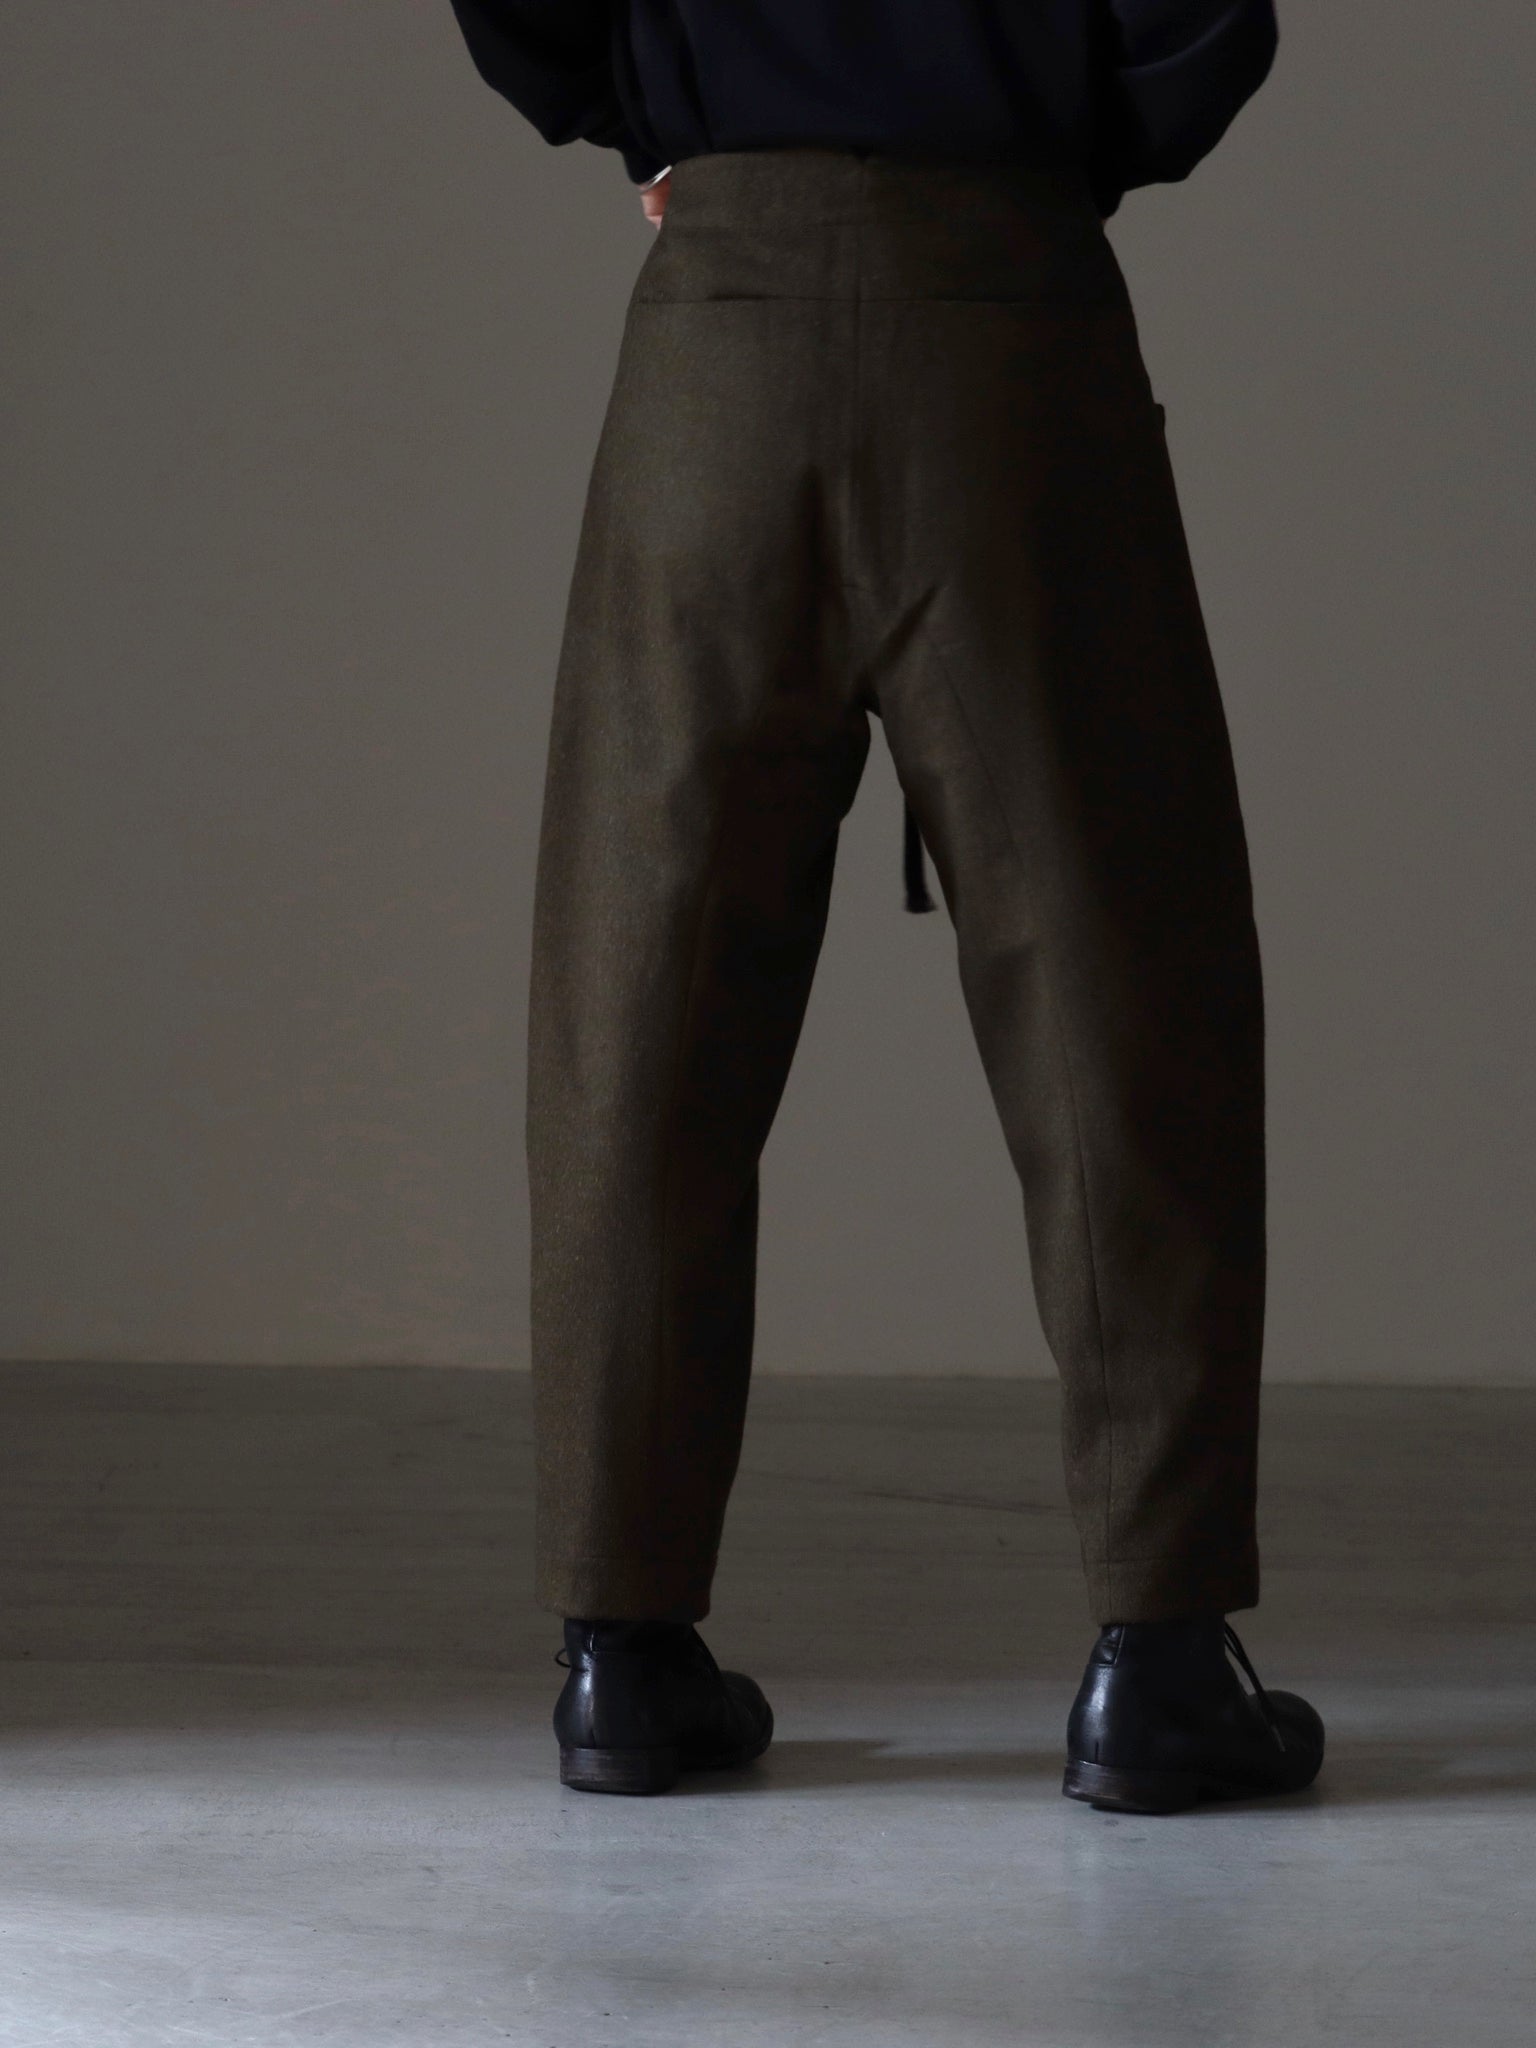 seventyfive-6-pocket-tapered-trousers-brown-olive-6